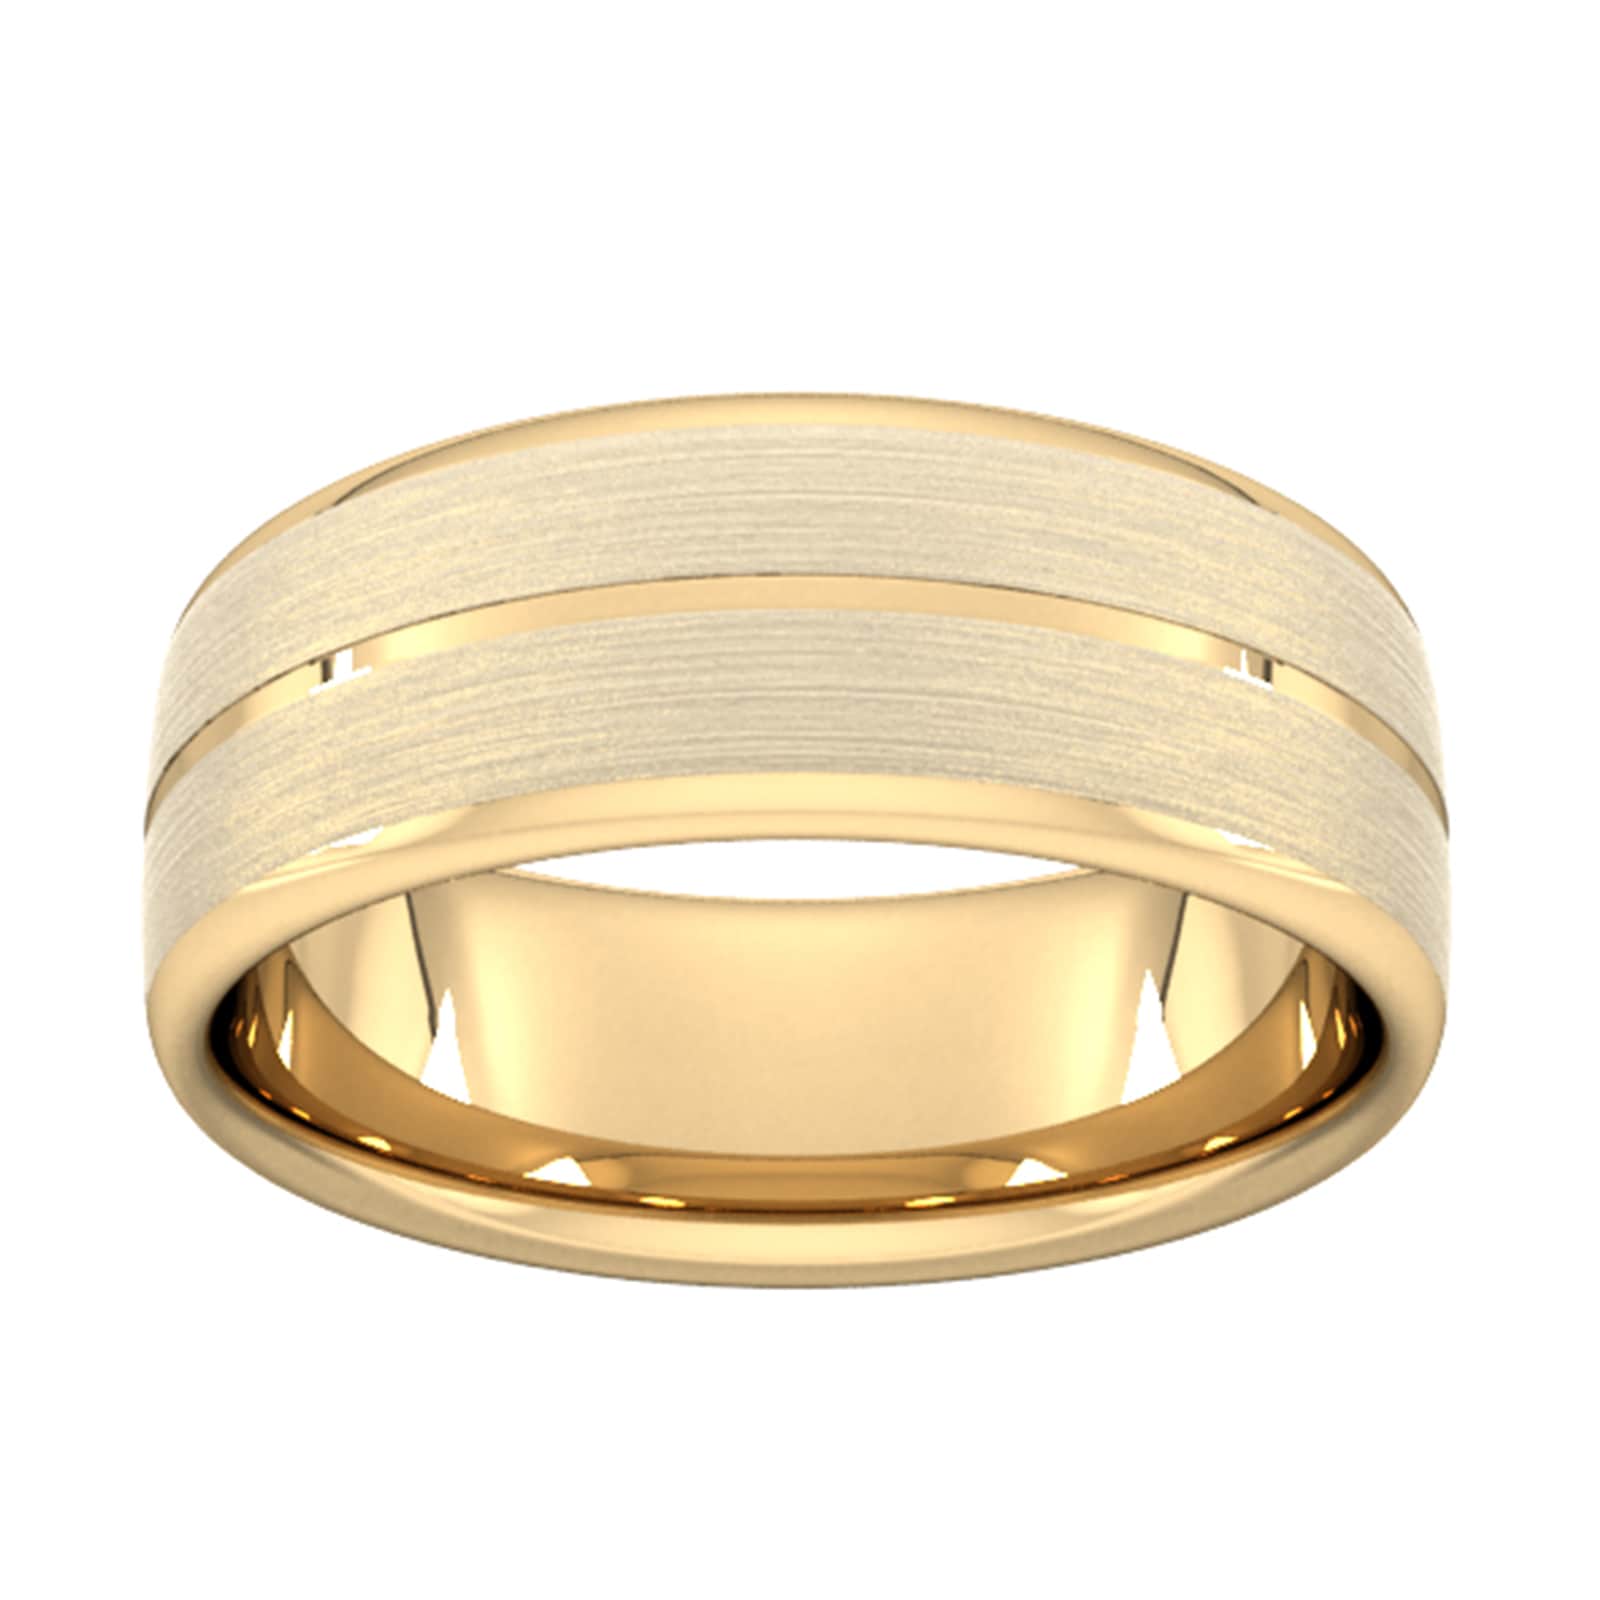 8mm Slight Court Standard Centre Groove With Chamfered Edge Wedding Ring In 9 Carat Yellow Gold - Ring Size O